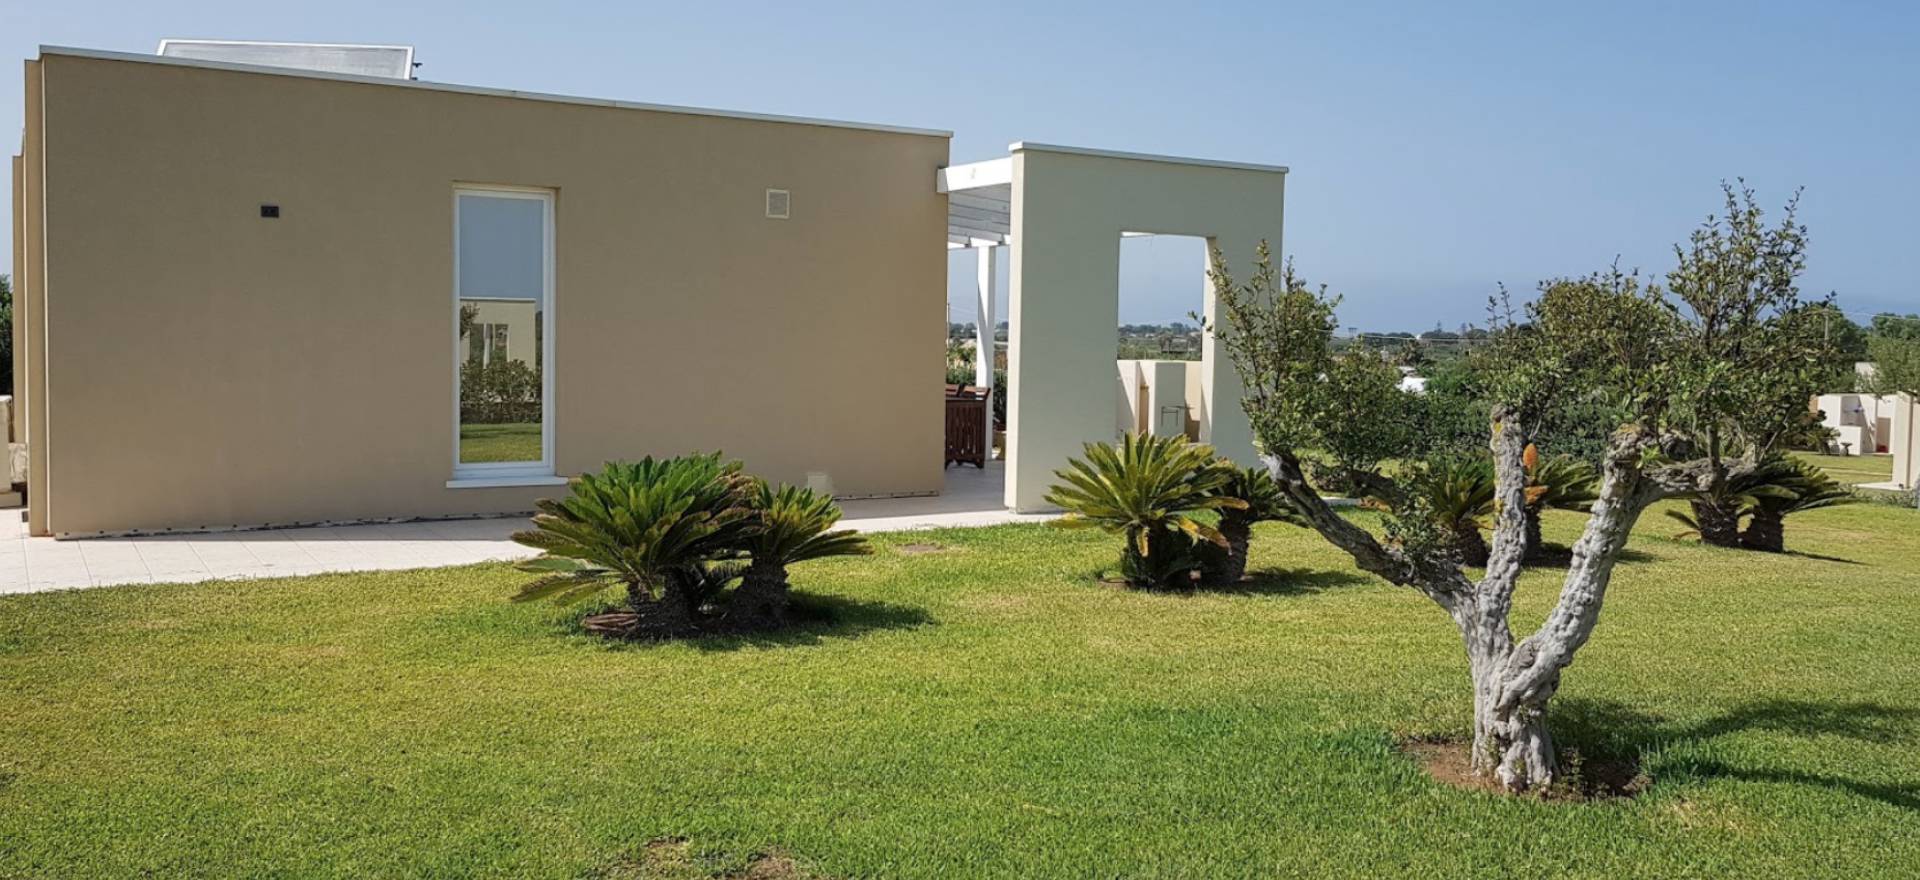 Agriturismo Sicily Luxury agriturismo for beach lovers